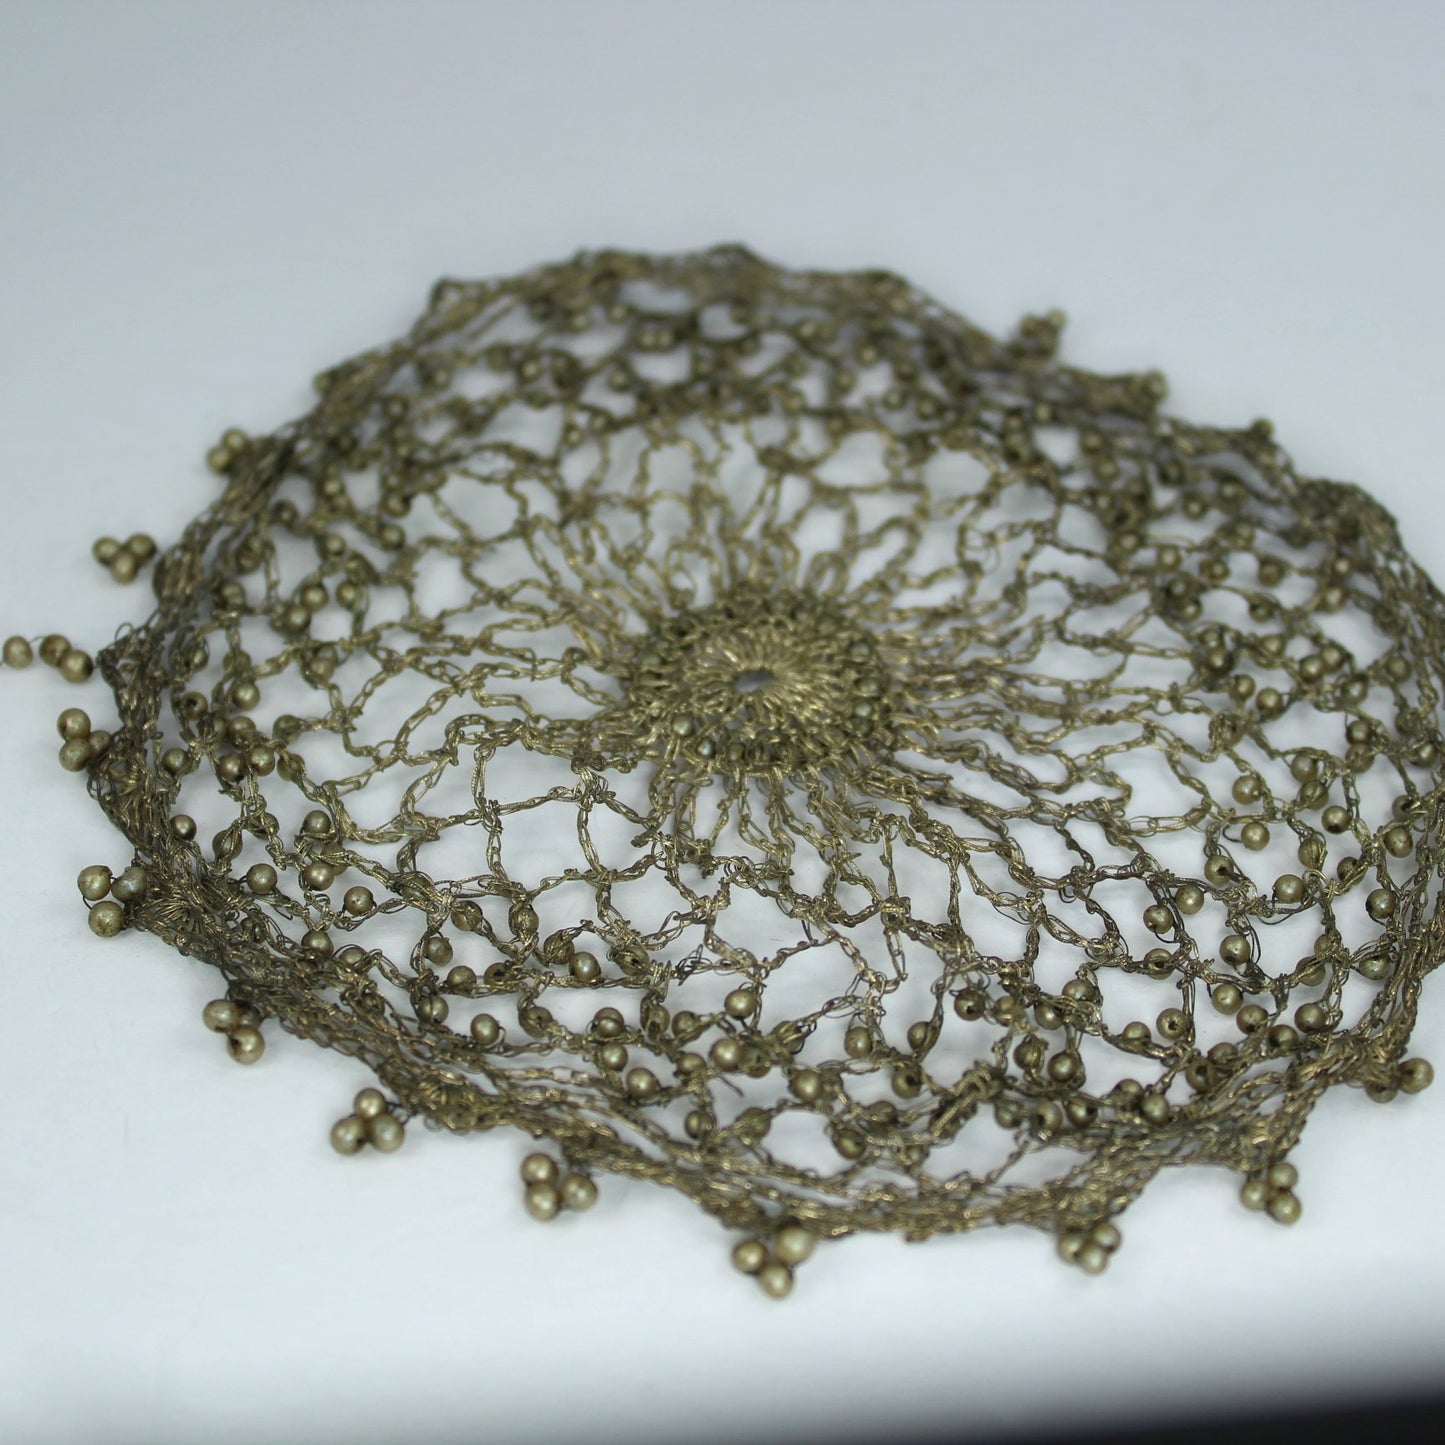 Exquisite Victorian Hair Chignon Snood Crochet Metallic Thread Pearls Rosewood Box laying flat view